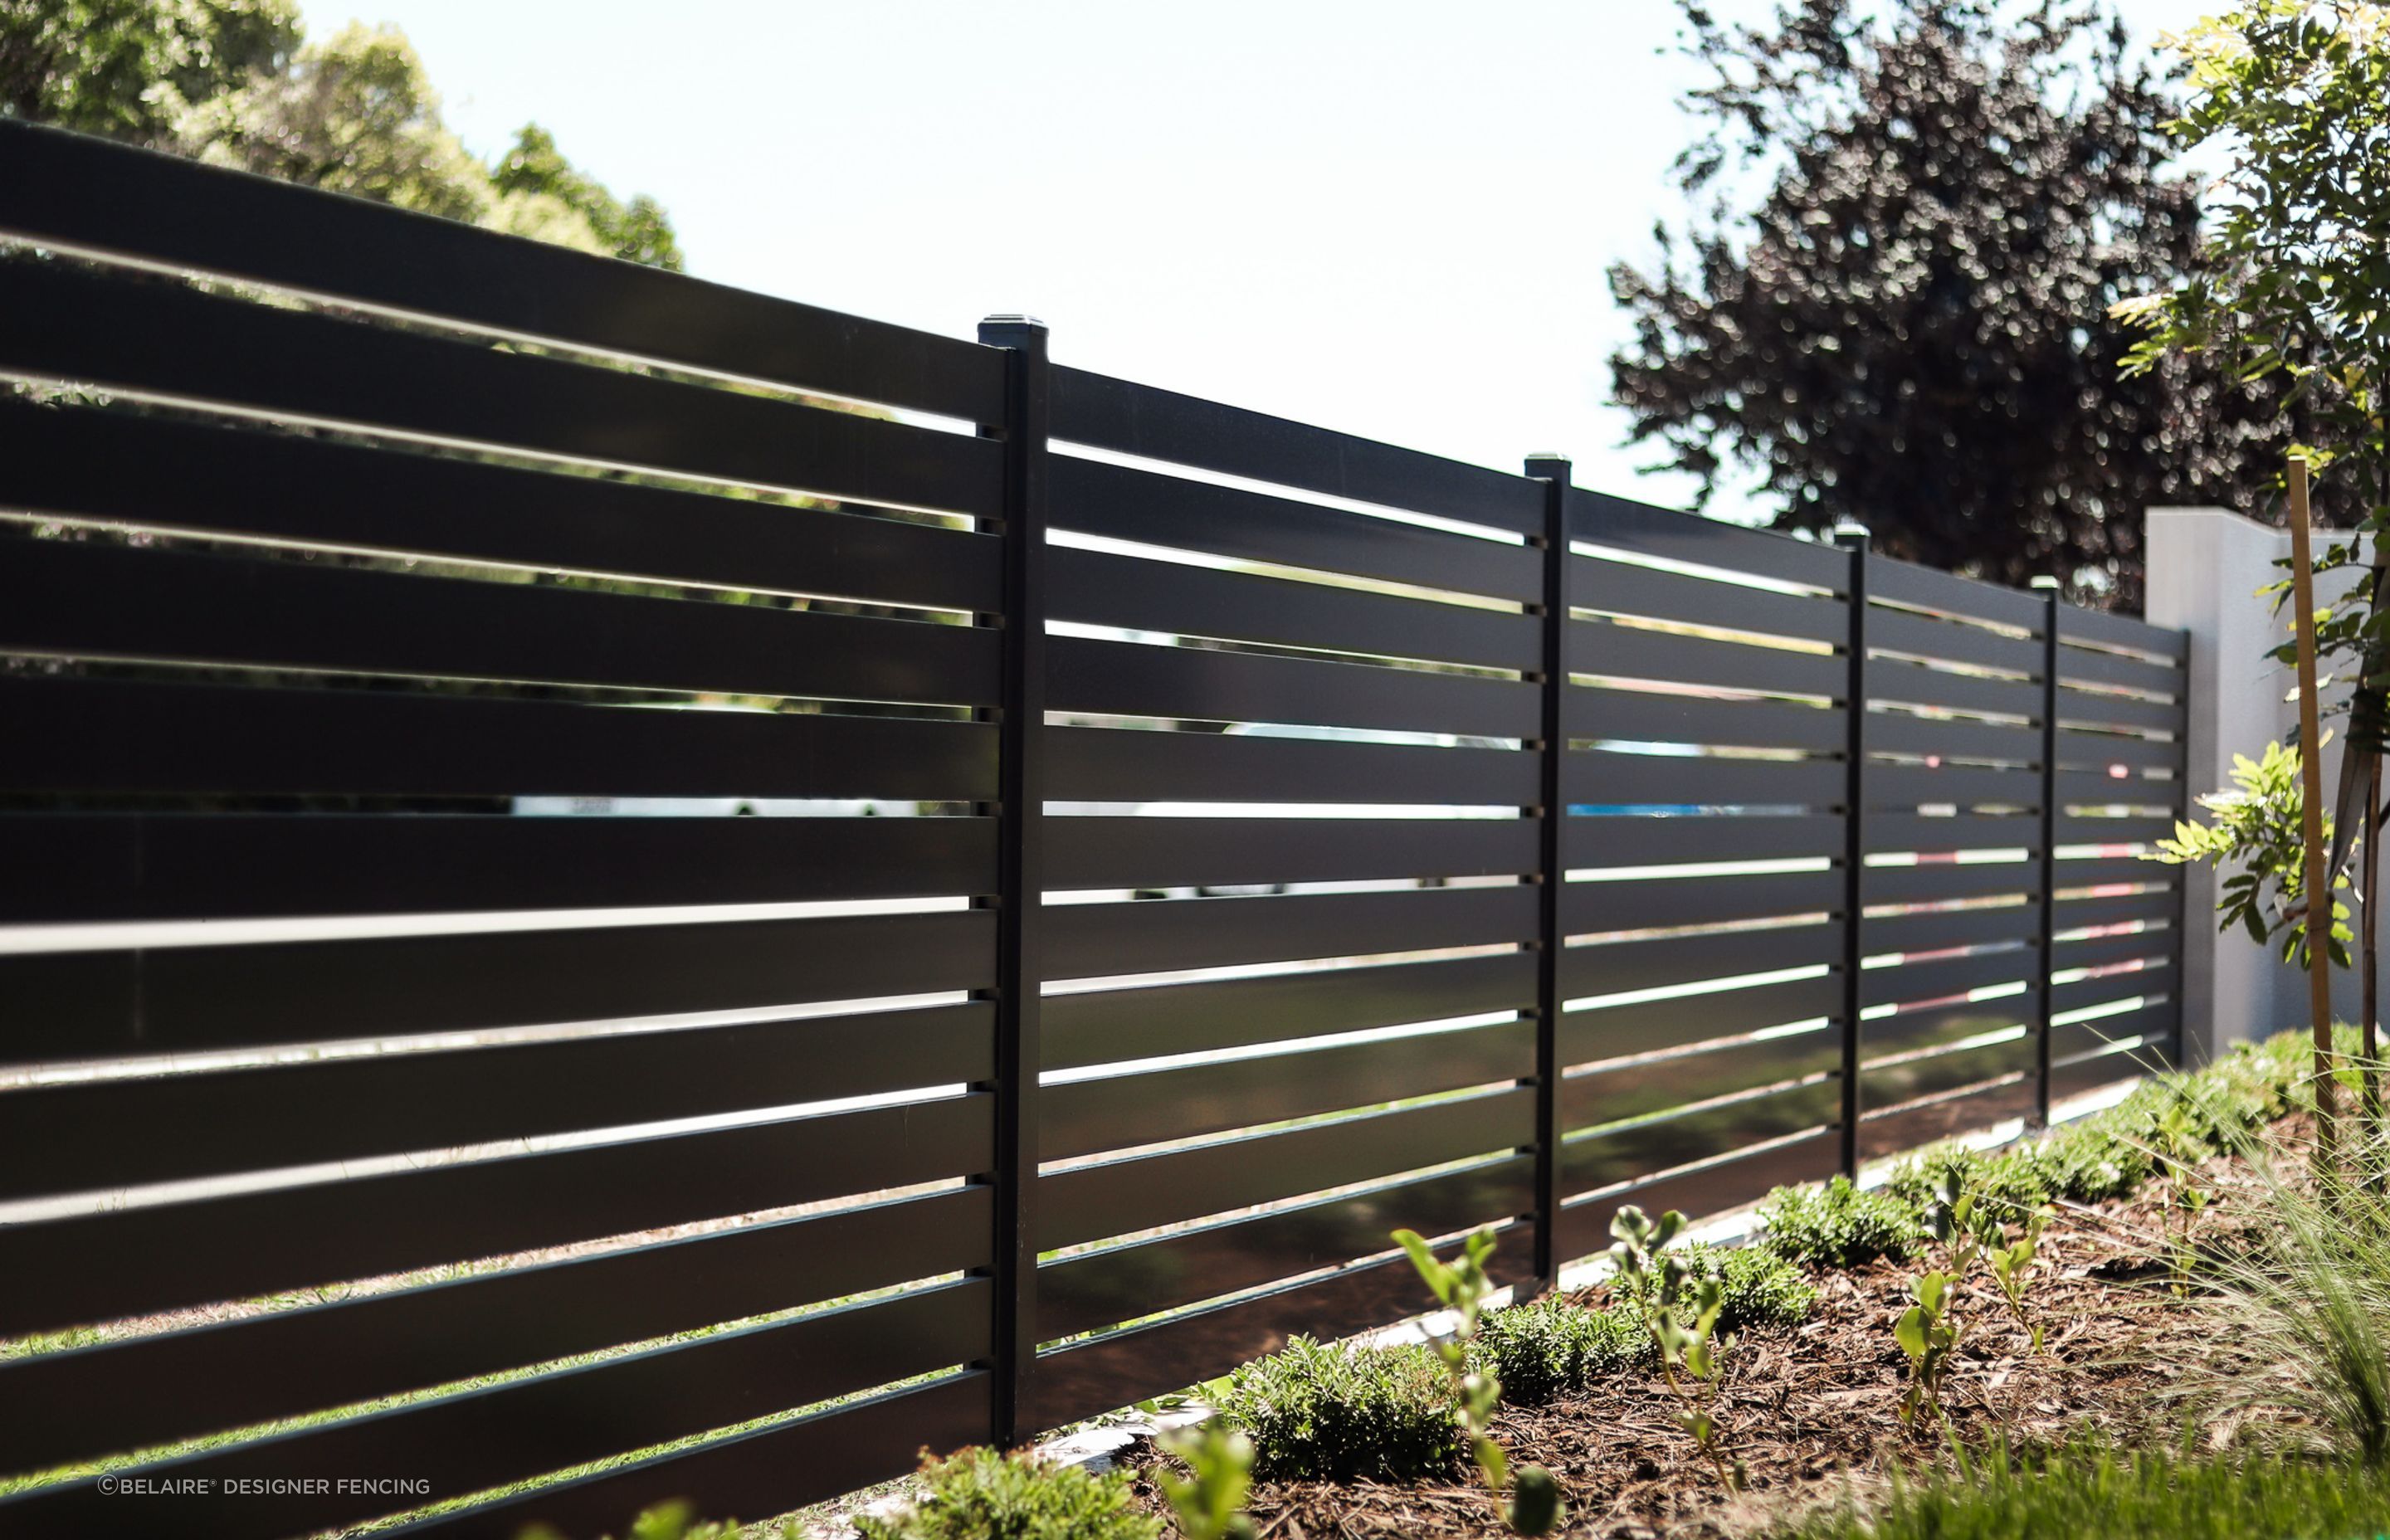 Sleek and maintenance free make options like the BelAire Aluminium Fencing and Screens very appealing for the modern home.